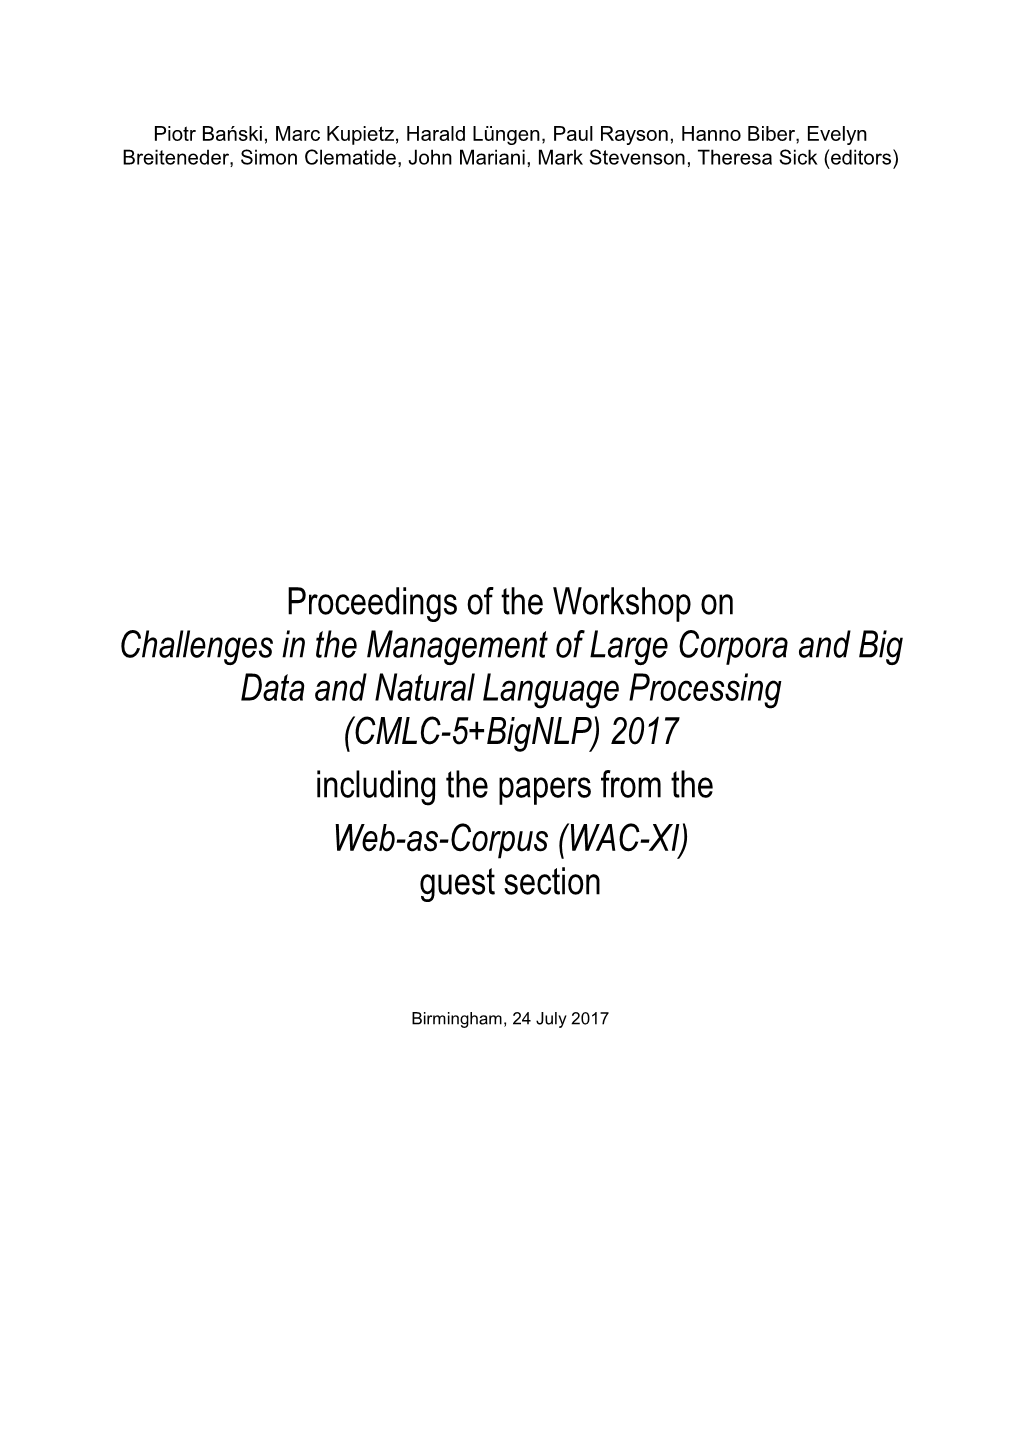 Proceedings of the Workshop on Challenges in the Management of Large Corpora and Big Data and Natural Language Processing (CMLC